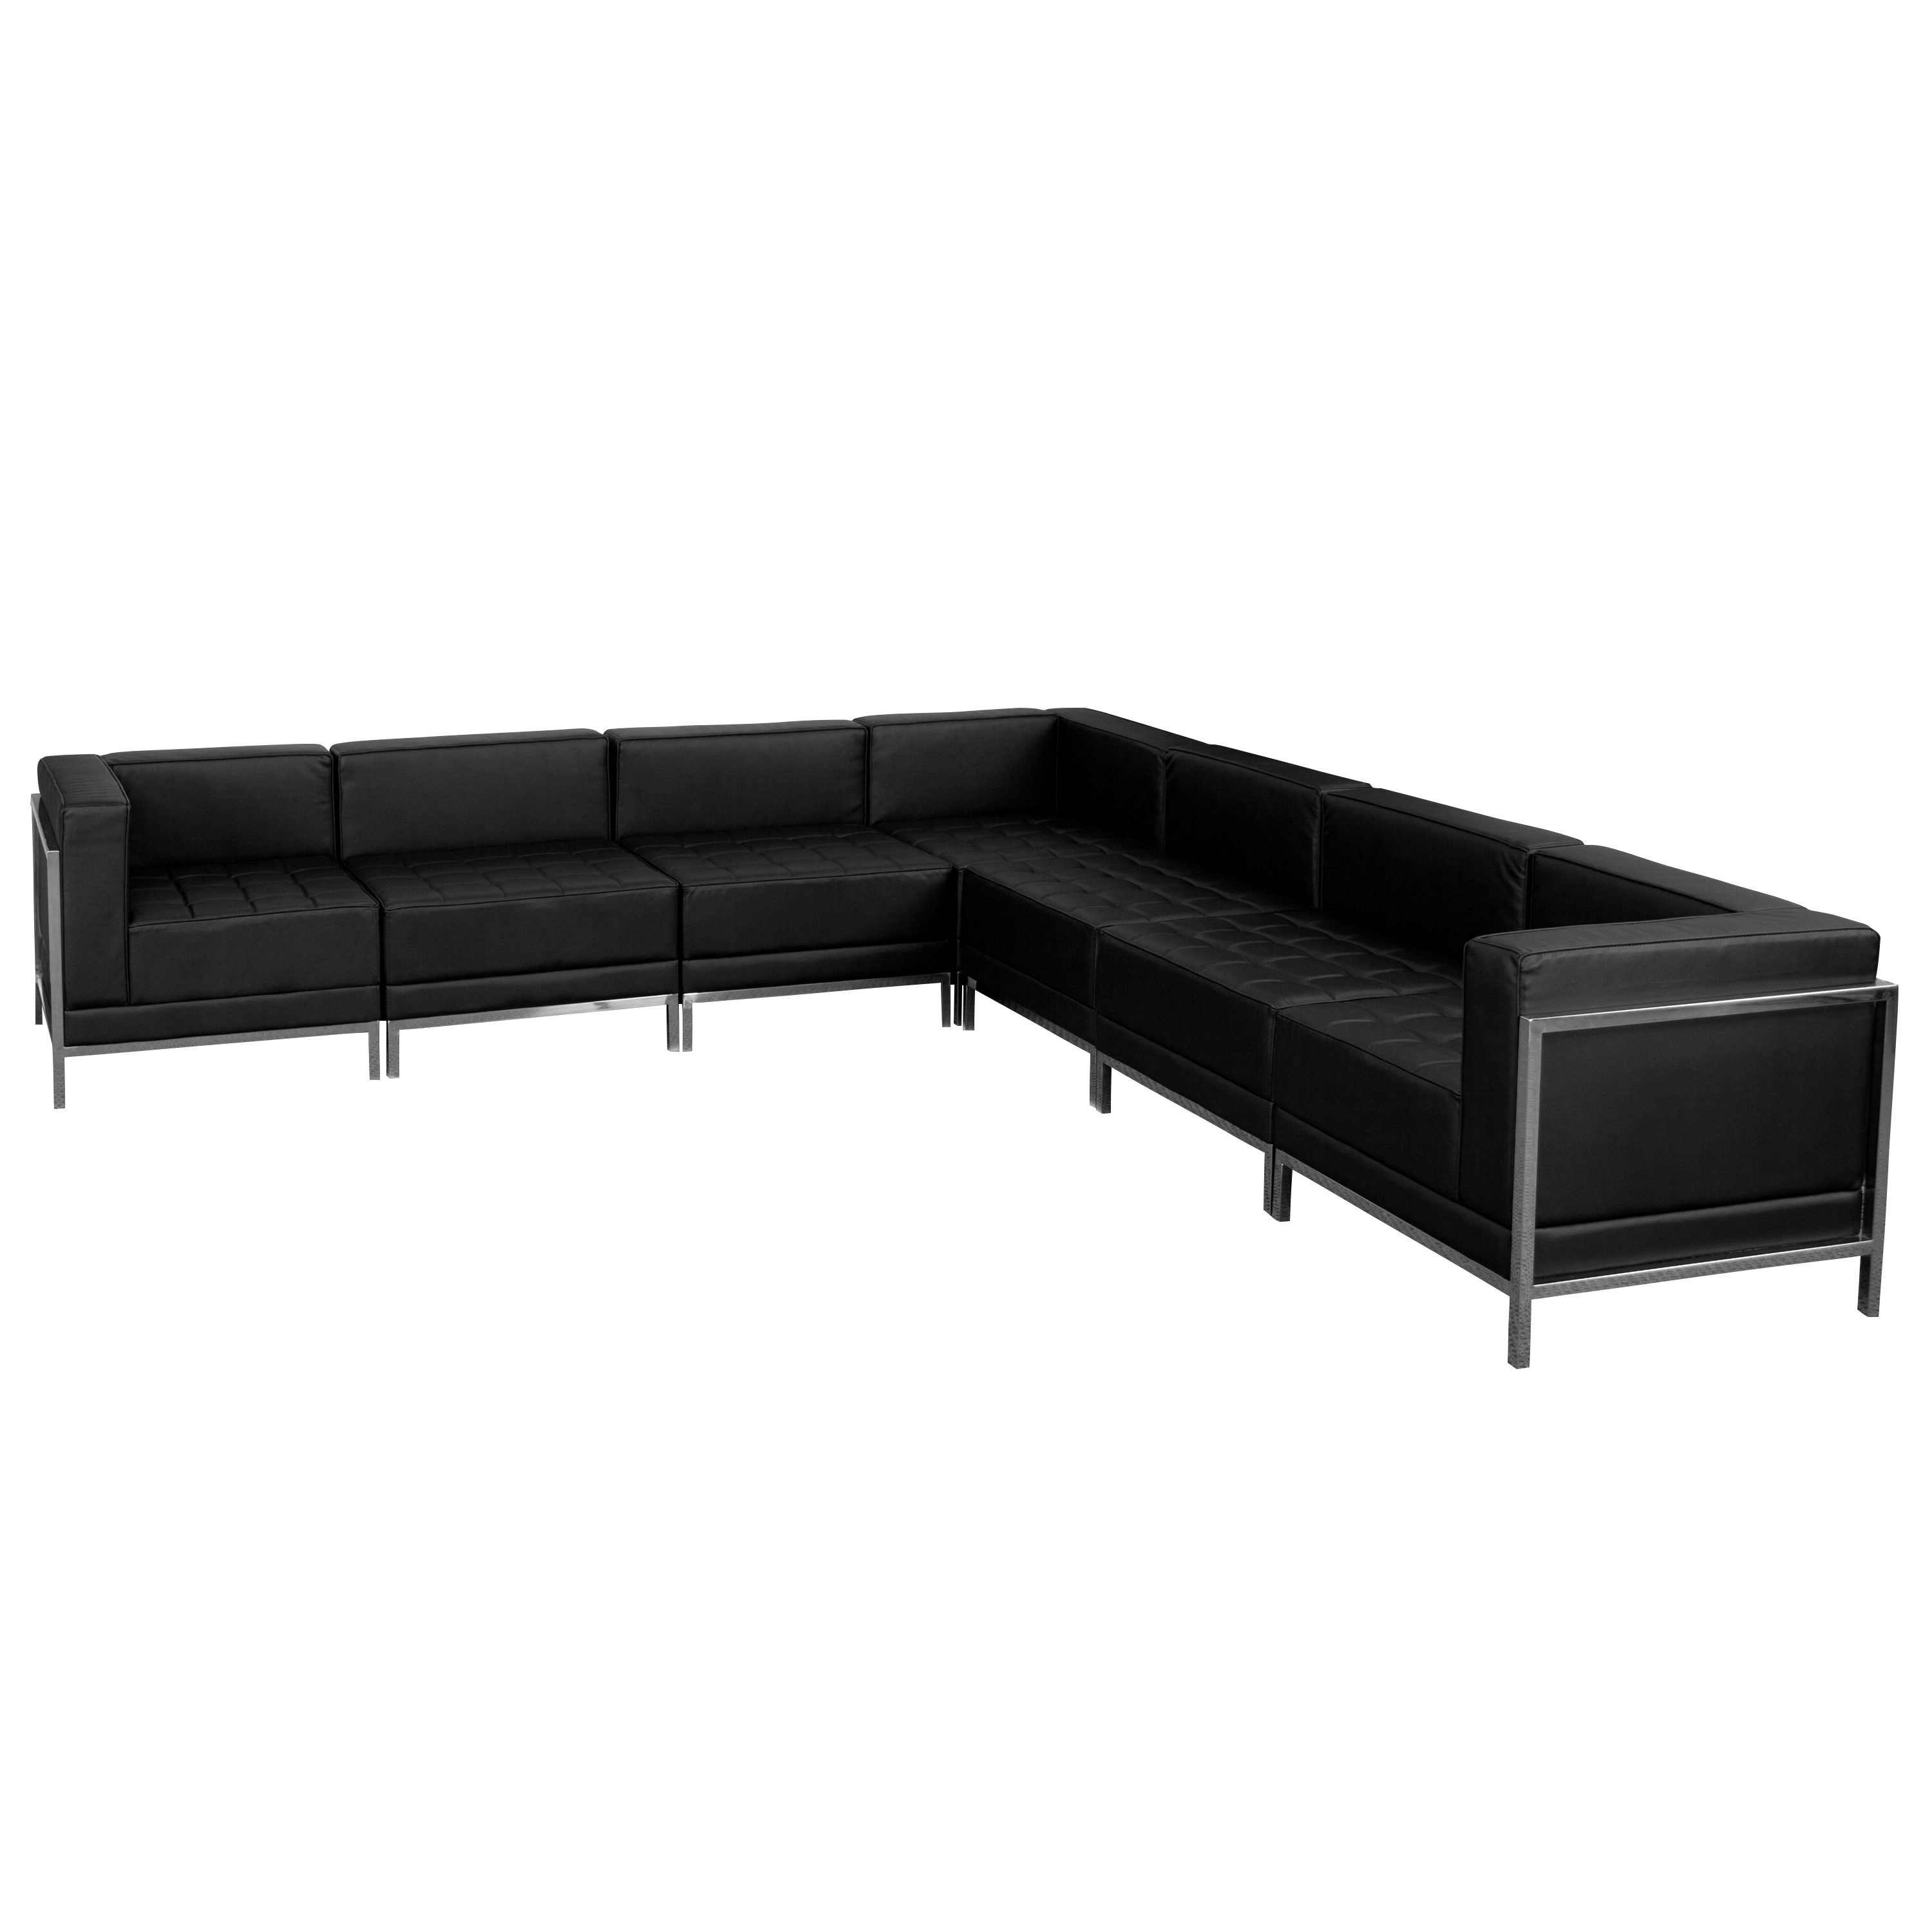 Flash Furniture ZB-IMAG-SECT-SET1-GG Hercules Imagination Series Black LeatherSoft Sectional Configuration, 7 Pieces